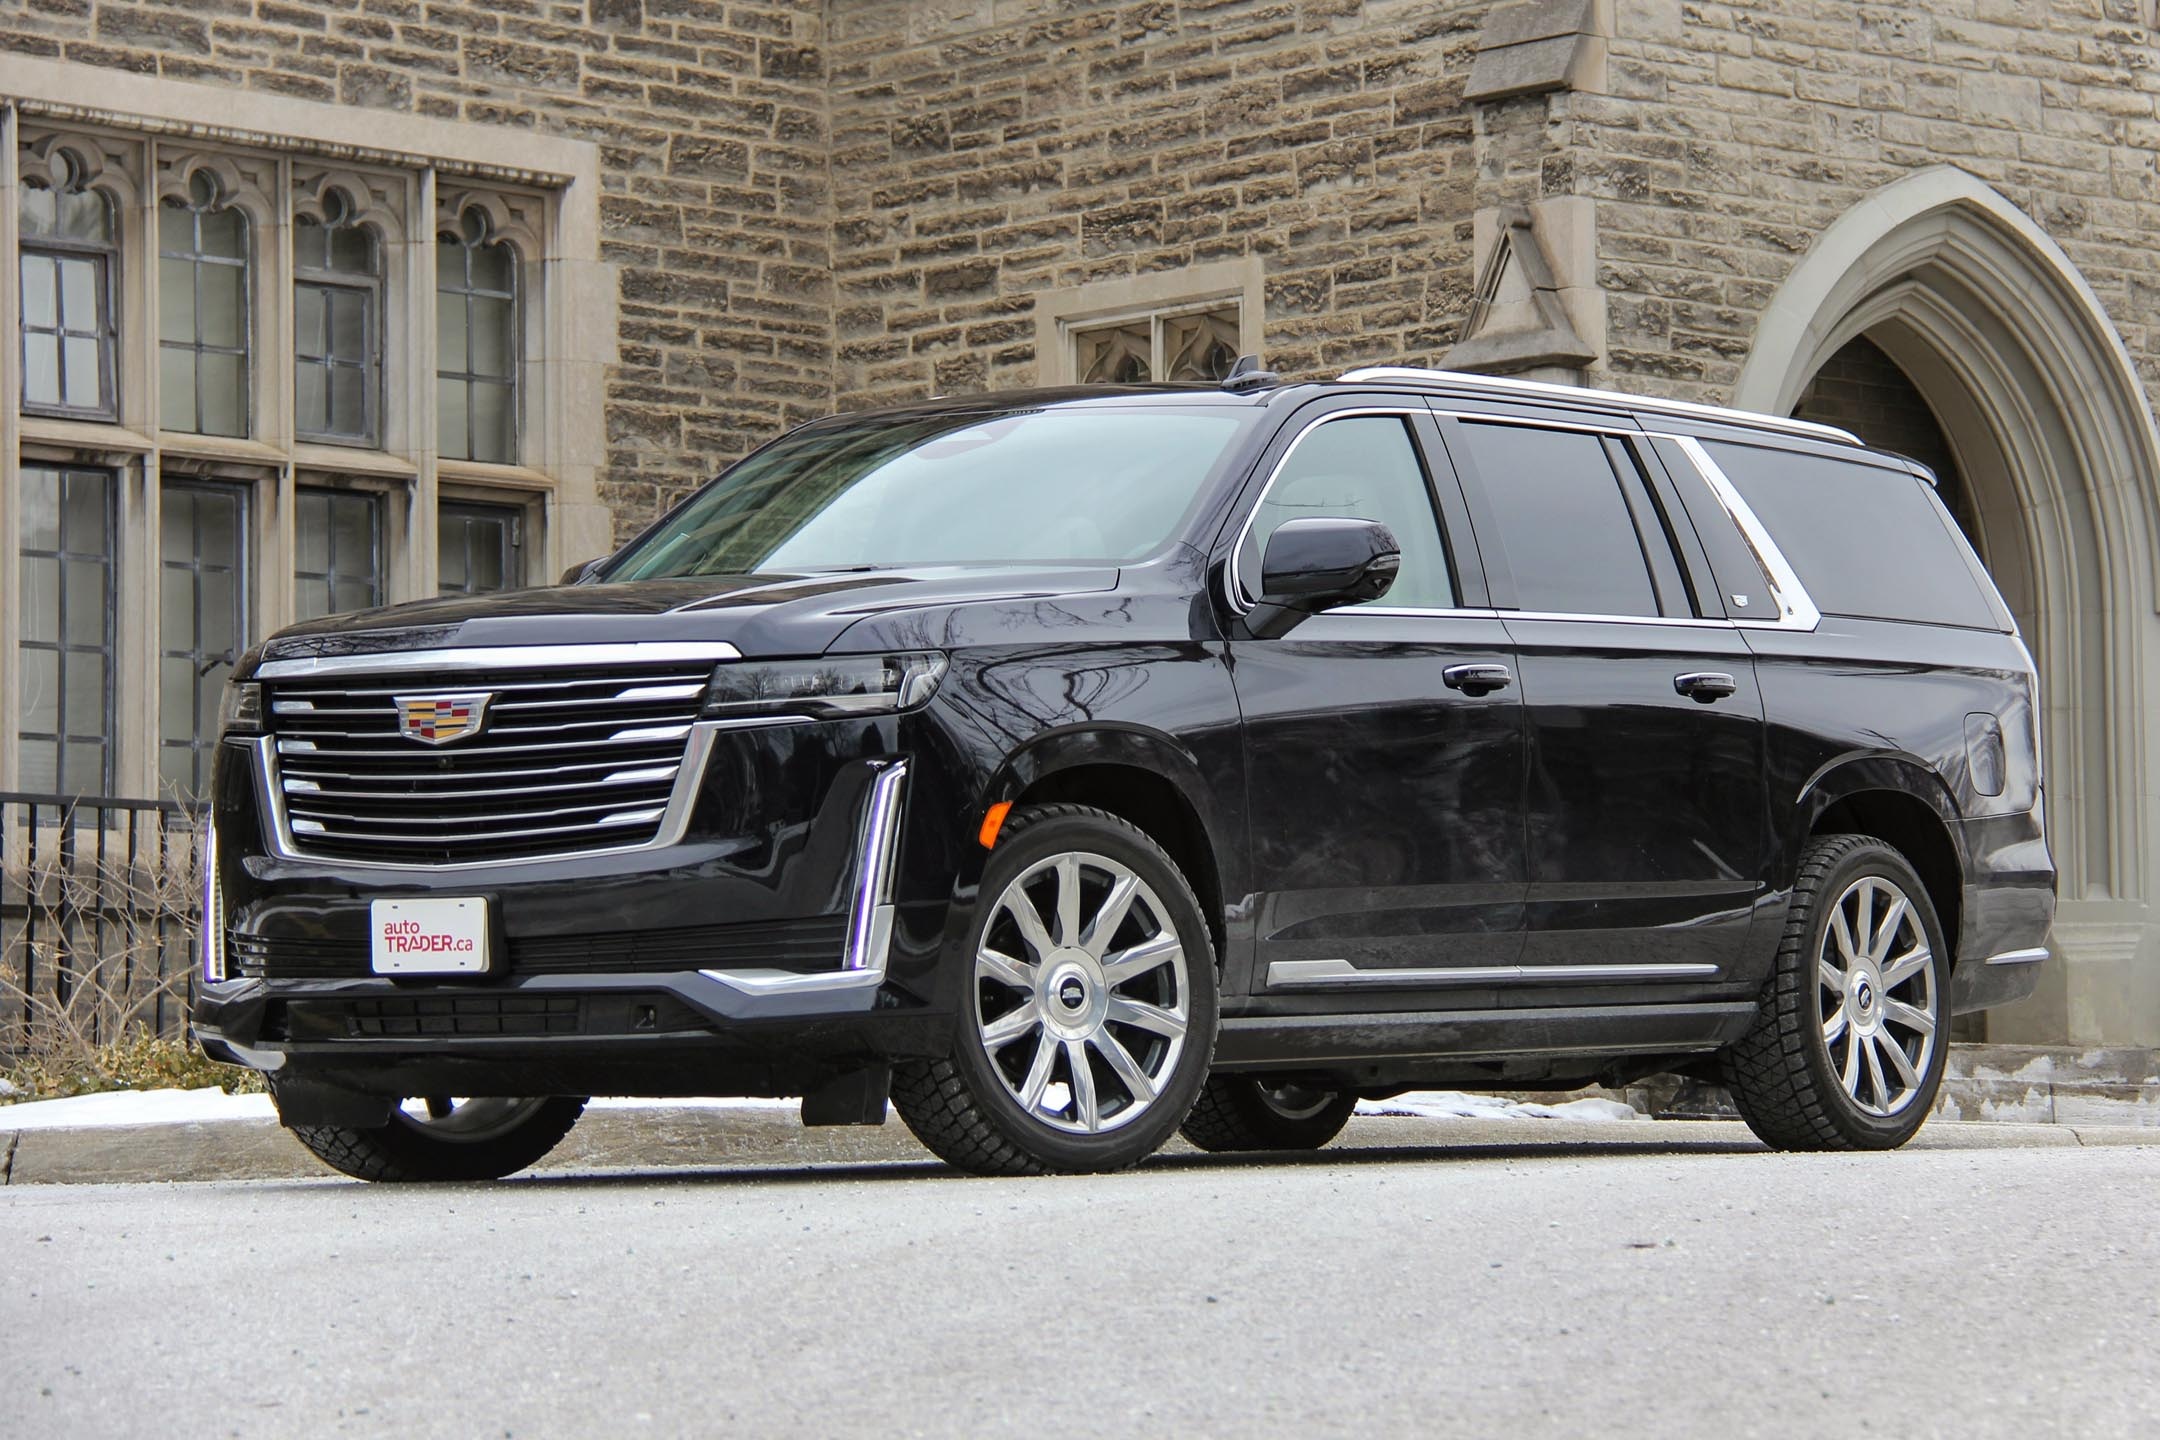 Cadillac Escalade, ESV review, Luxurious features, Smooth and comfortable ride, 2160x1440 HD Desktop